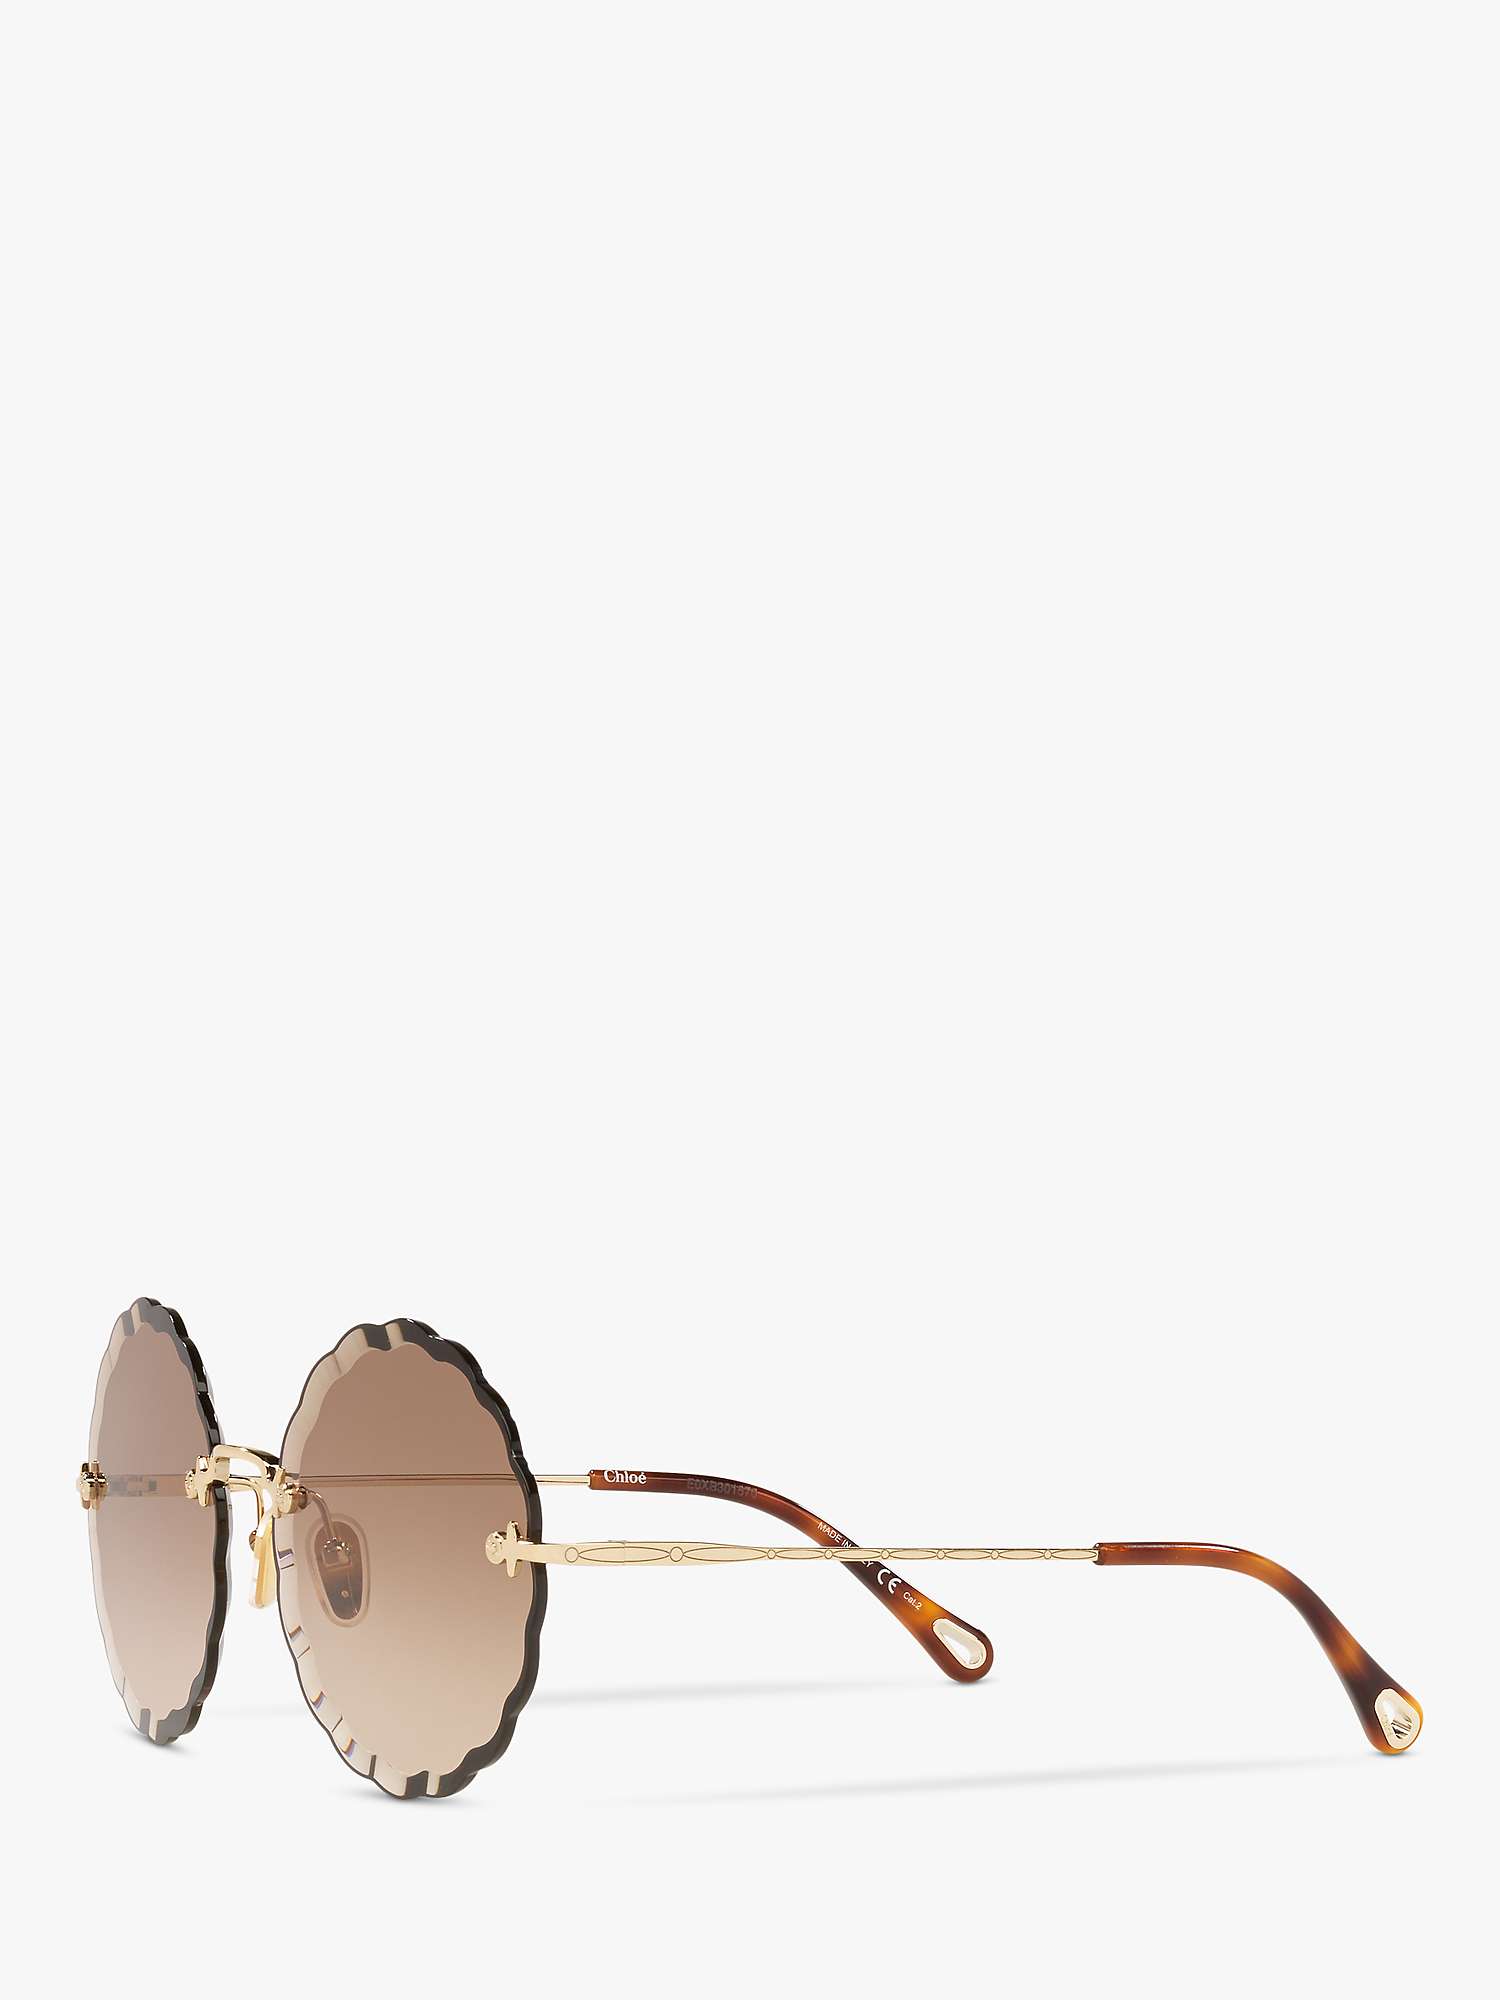 Buy Chloé CH0047S Women's Scalloped Round Sunglasses Online at johnlewis.com